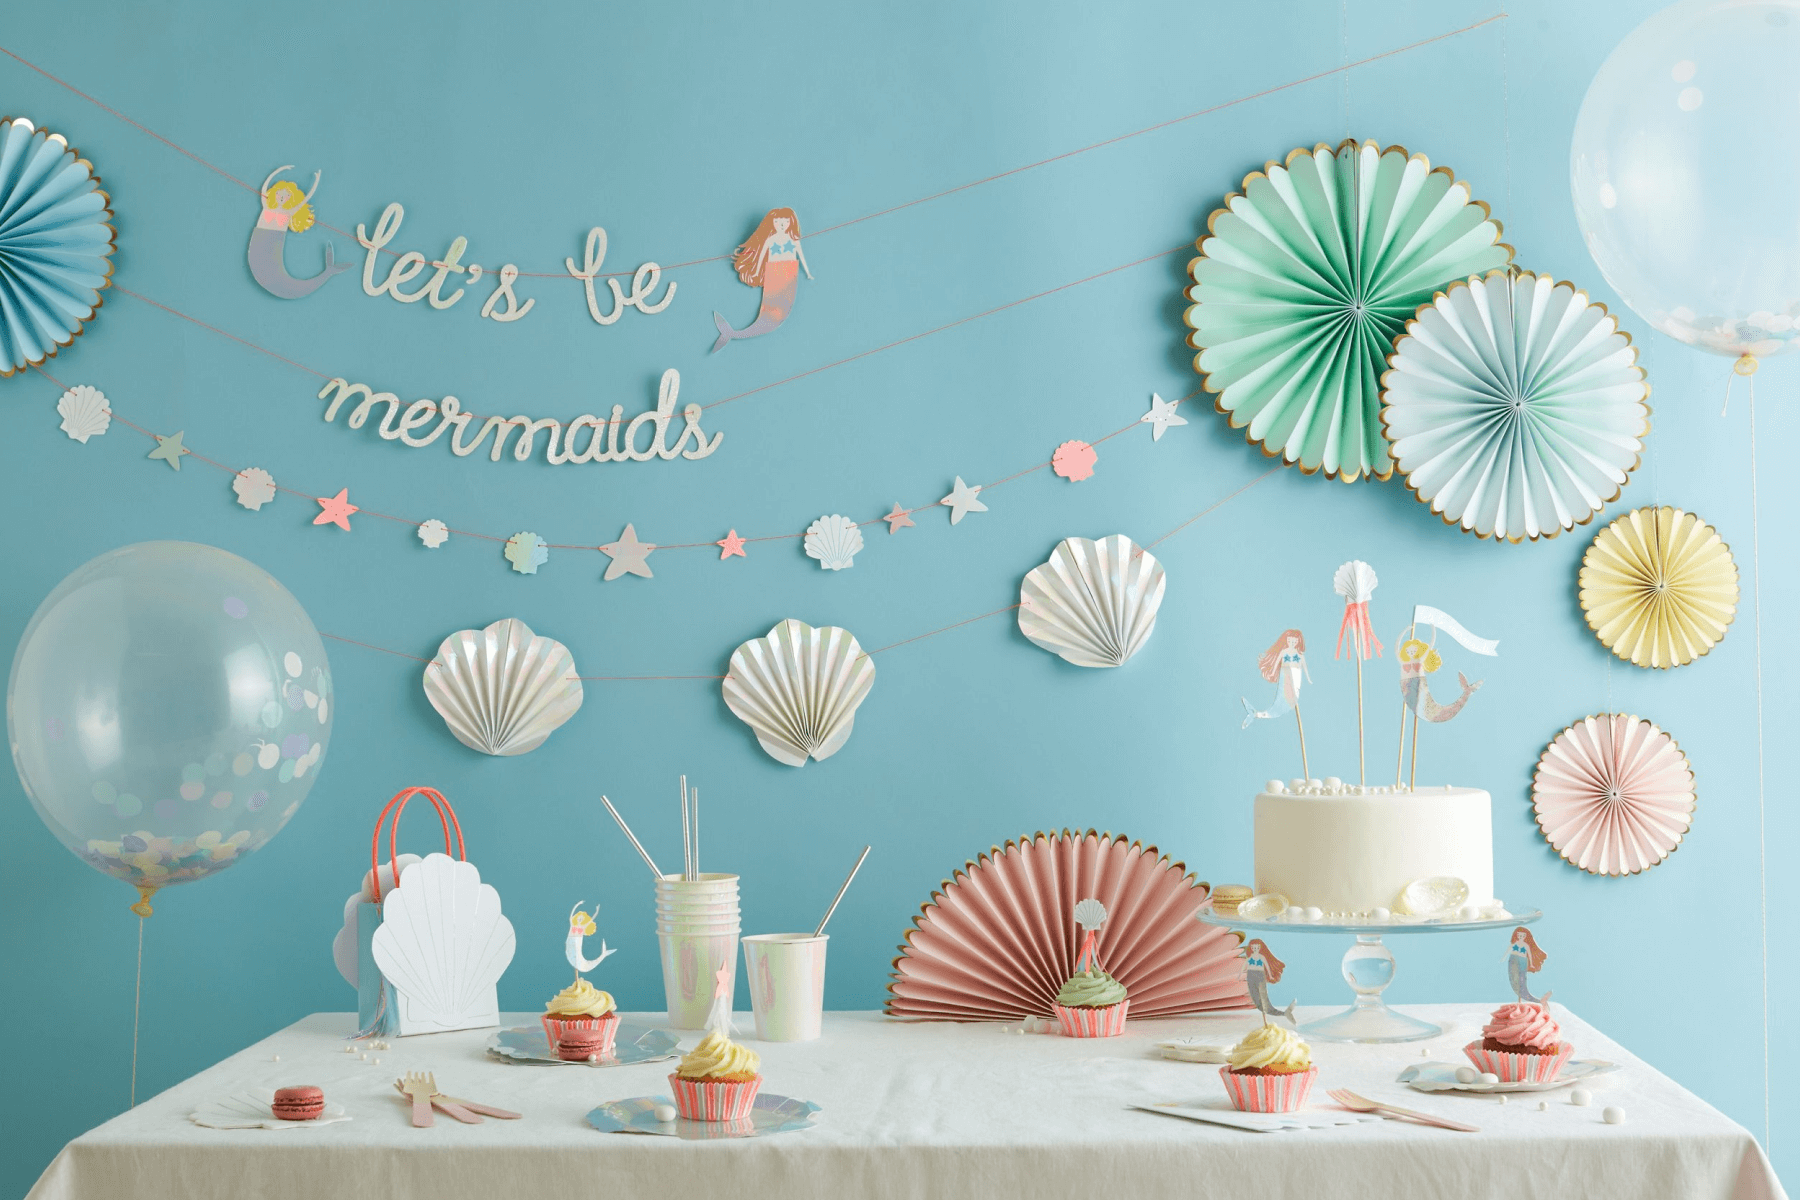 A party scene shows a table top and wall decorated with mermaid and under-the-sea themed party supplies including banners, honeycomb decor, balloons, and cake toppers.